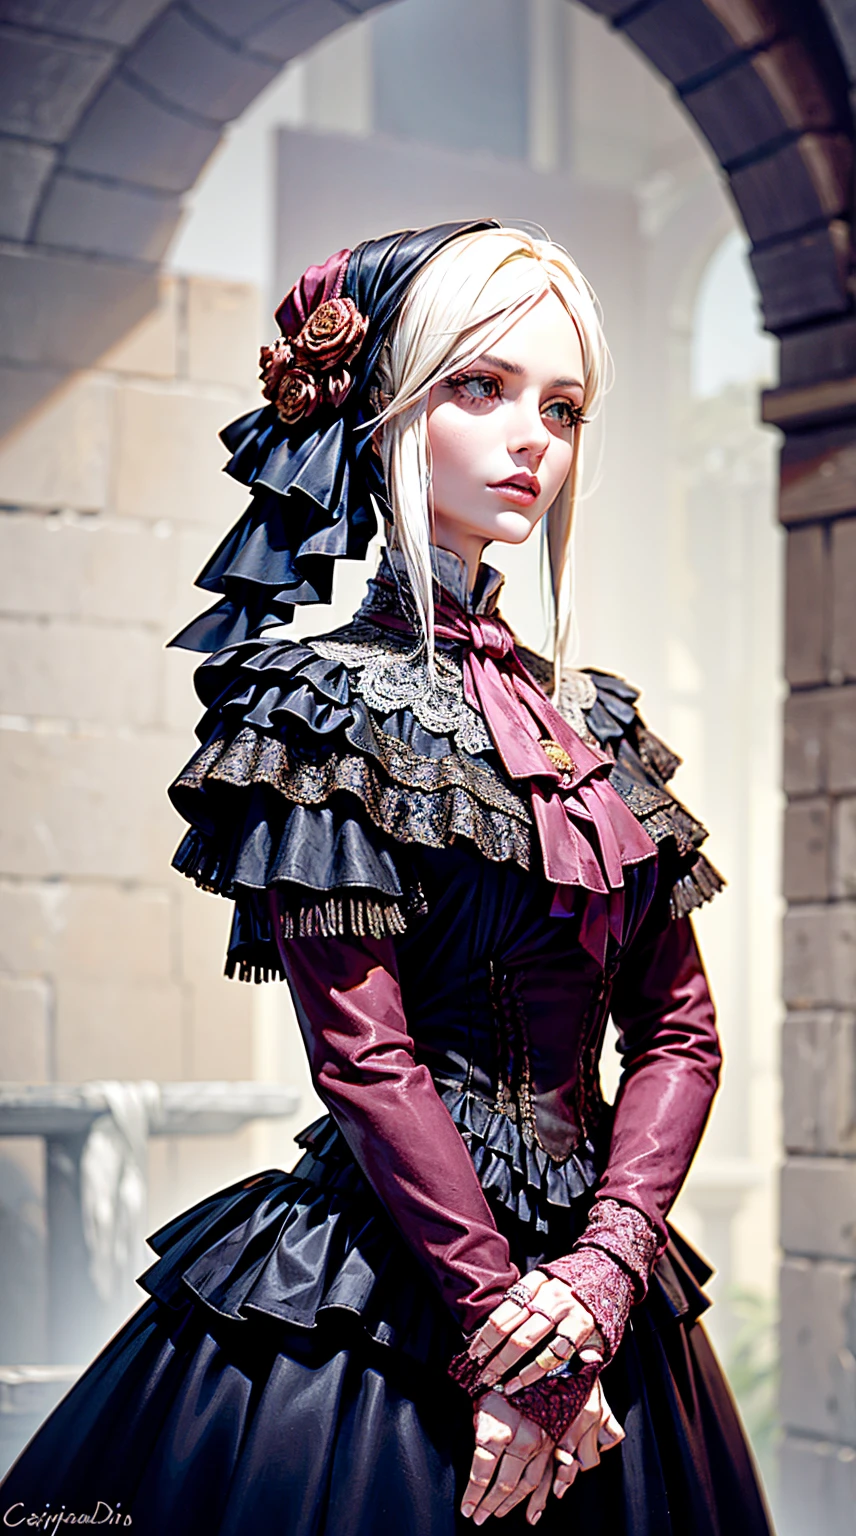 1 girl, beautiful, pink eyes, blond hair, big G cup breasts (huge breasts 1.5), short dress, wide hips, Thin waist, gloomy environment, bloodborne, victorian style buildings, fog